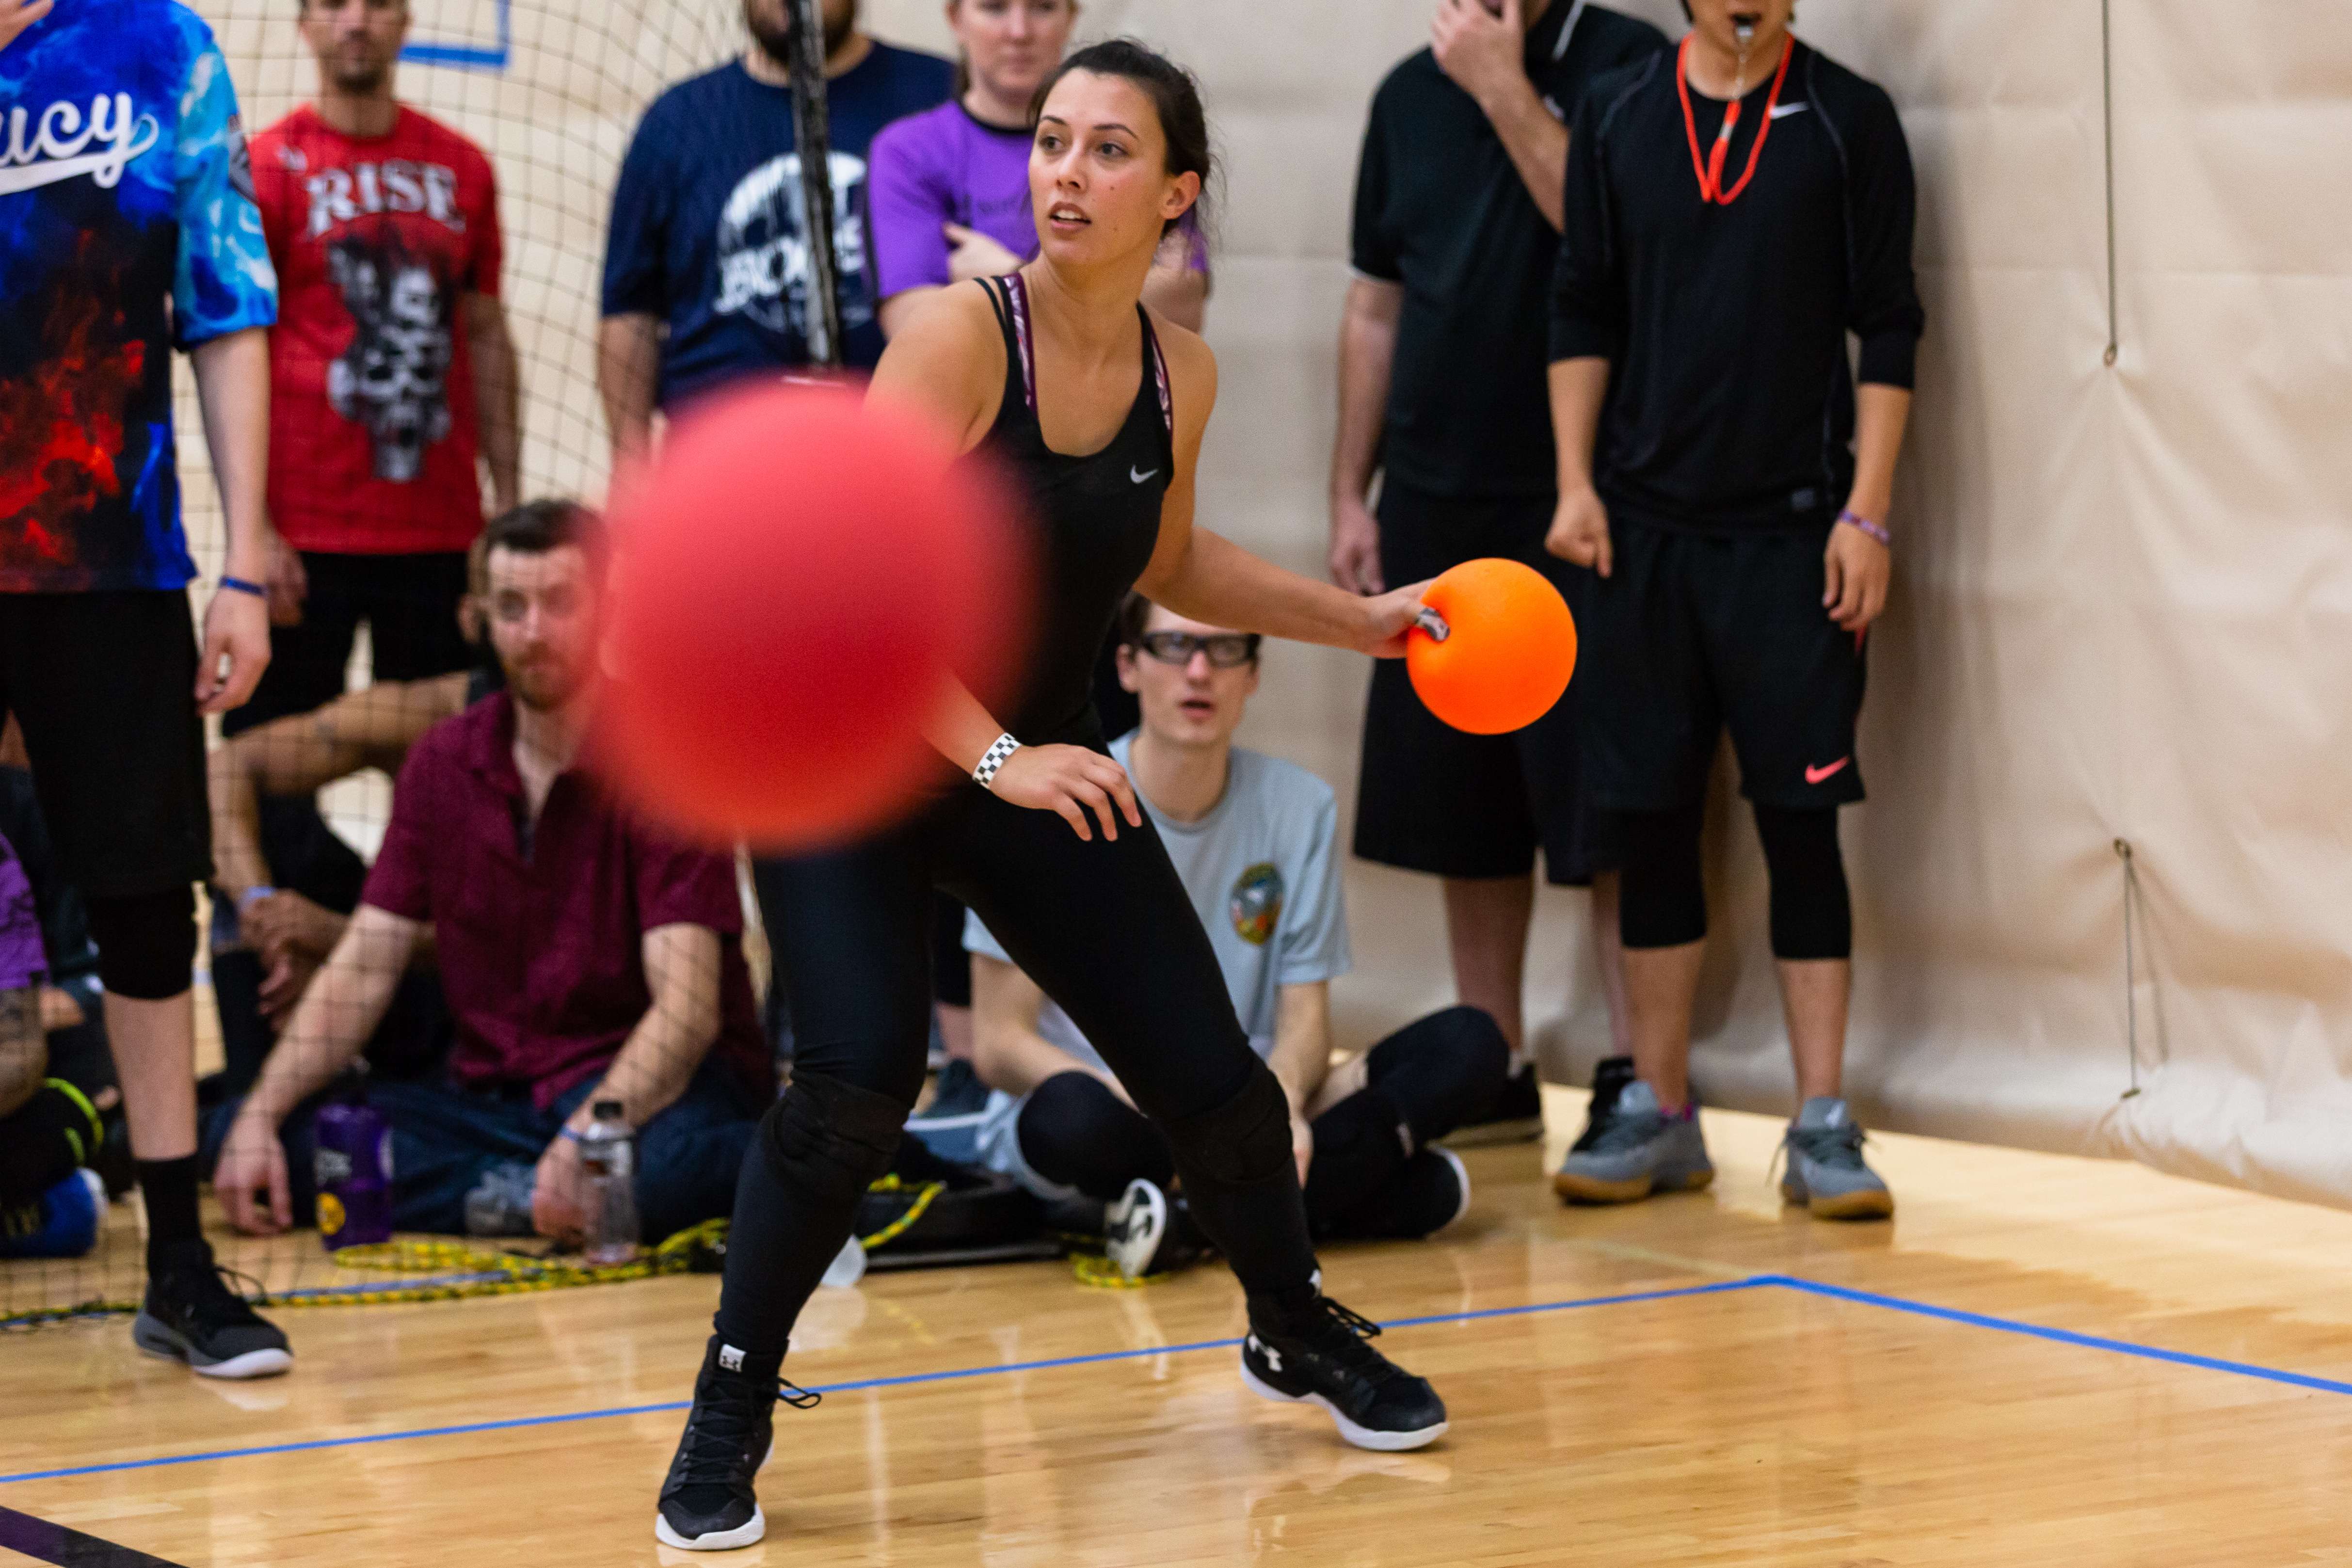 A dodgeball player surveys the field with an arm outstretched ready to throw